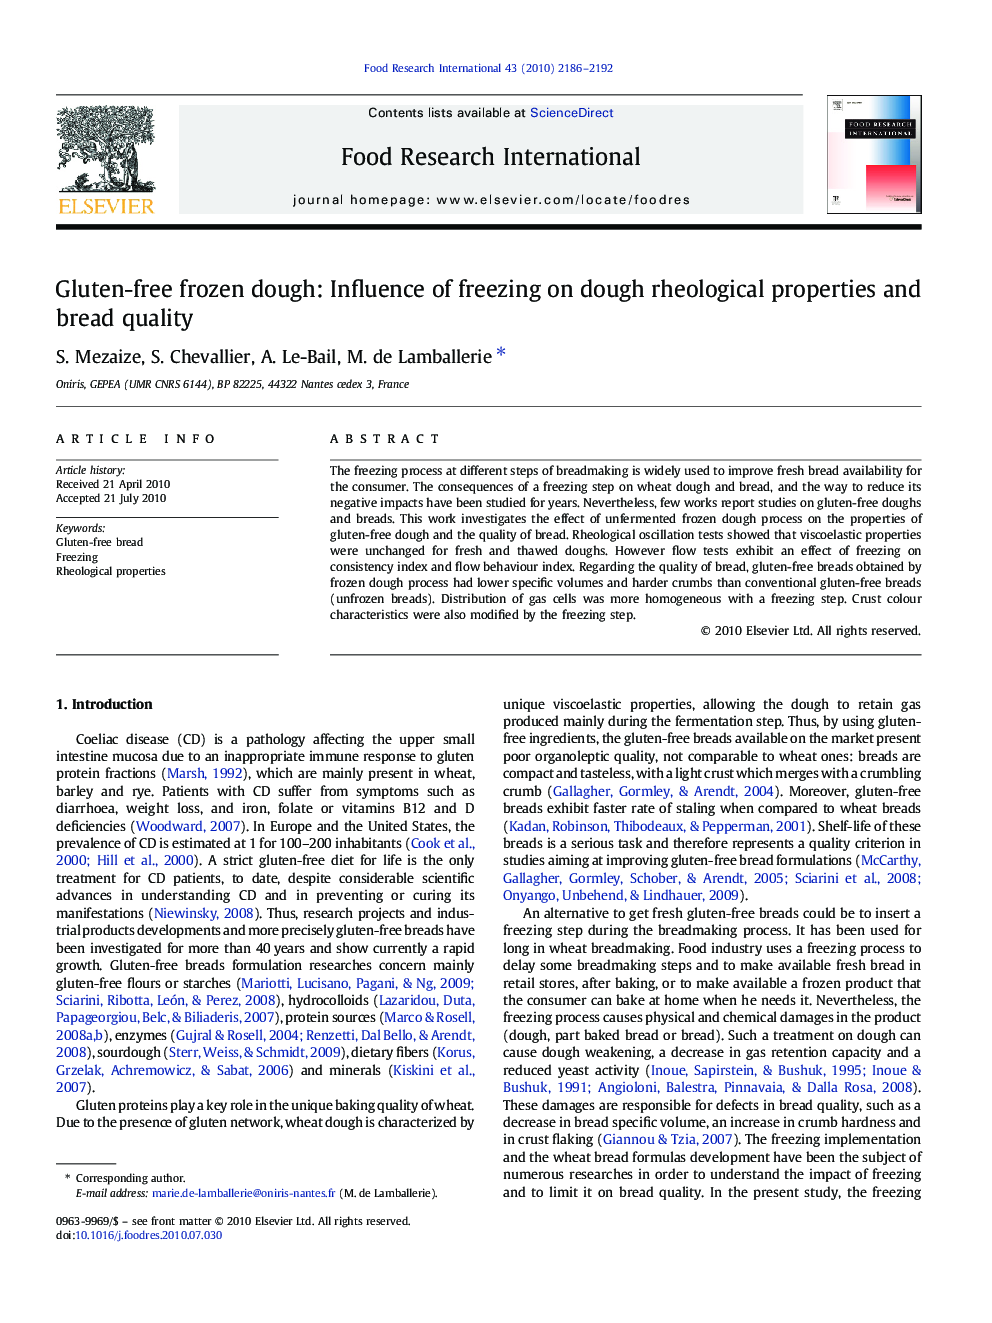 Gluten-free frozen dough: Influence of freezing on dough rheological properties and bread quality